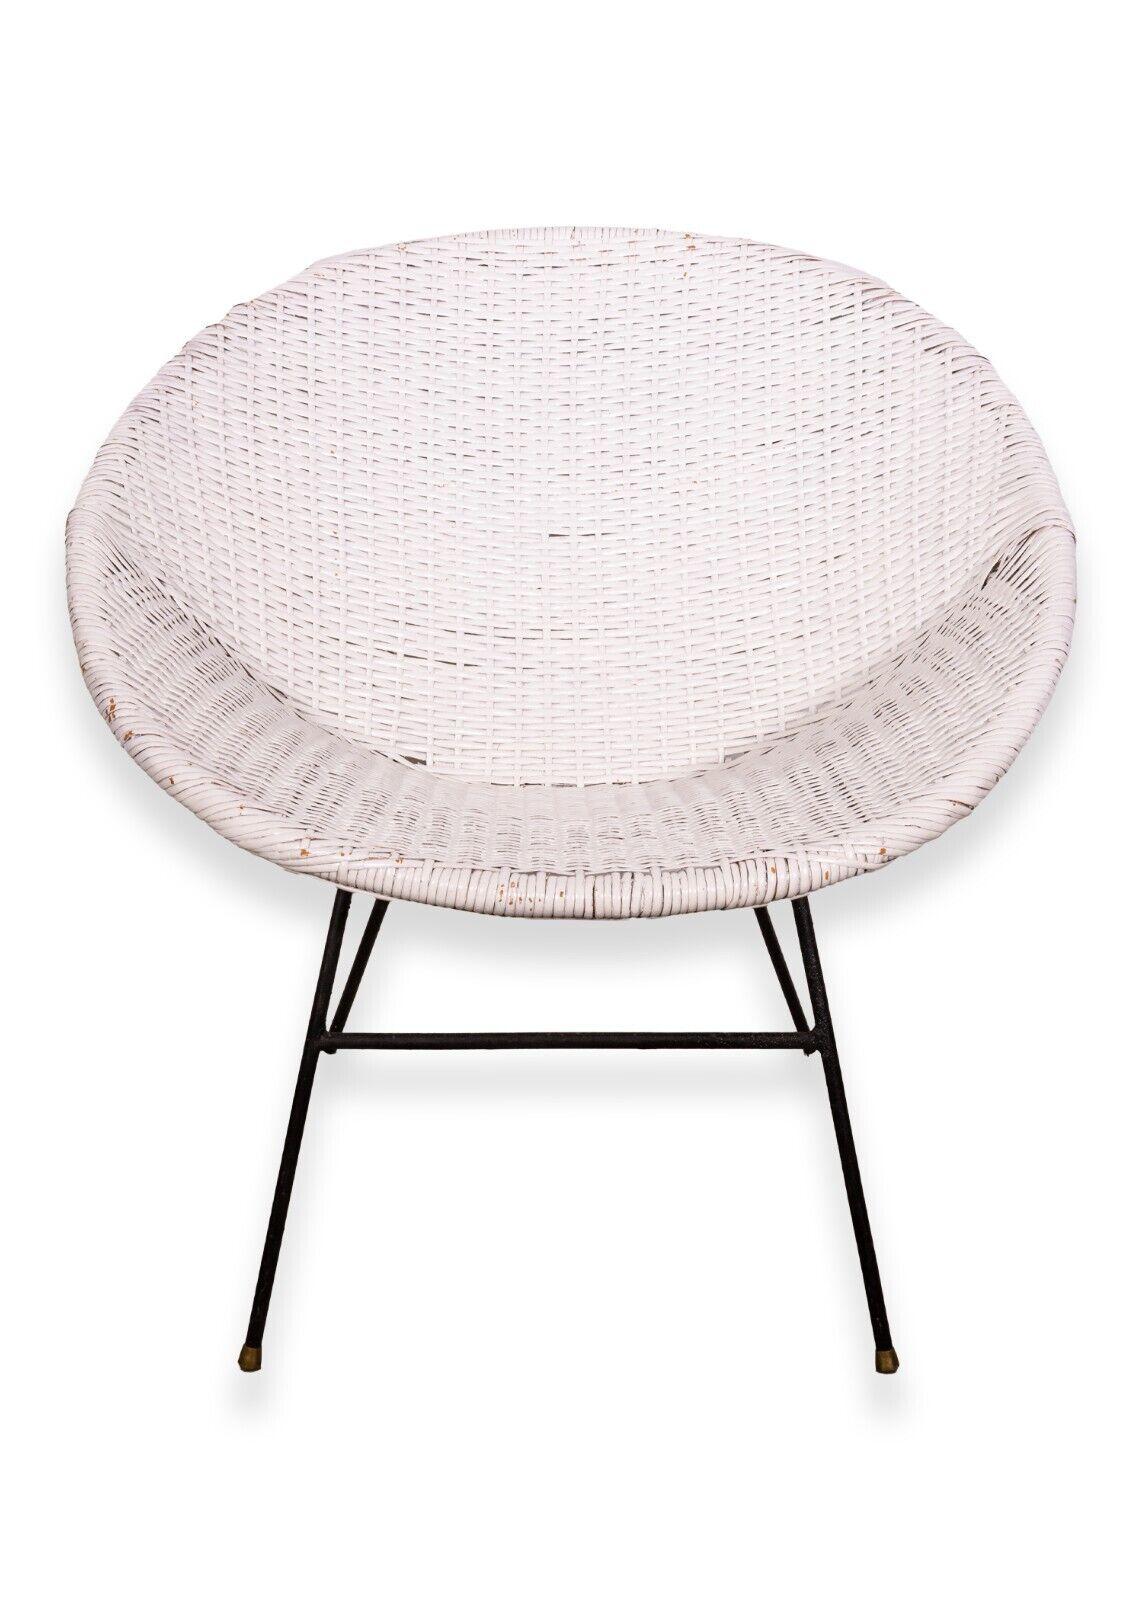 A Mid-Century Modern pair of scoop rattan chairs. A very chic set of chairs. These chairs are made of a woven wood rattan with a metal base. These chairs sit very comfortably firm thanks to their iconic bucket design. They are finished in a white